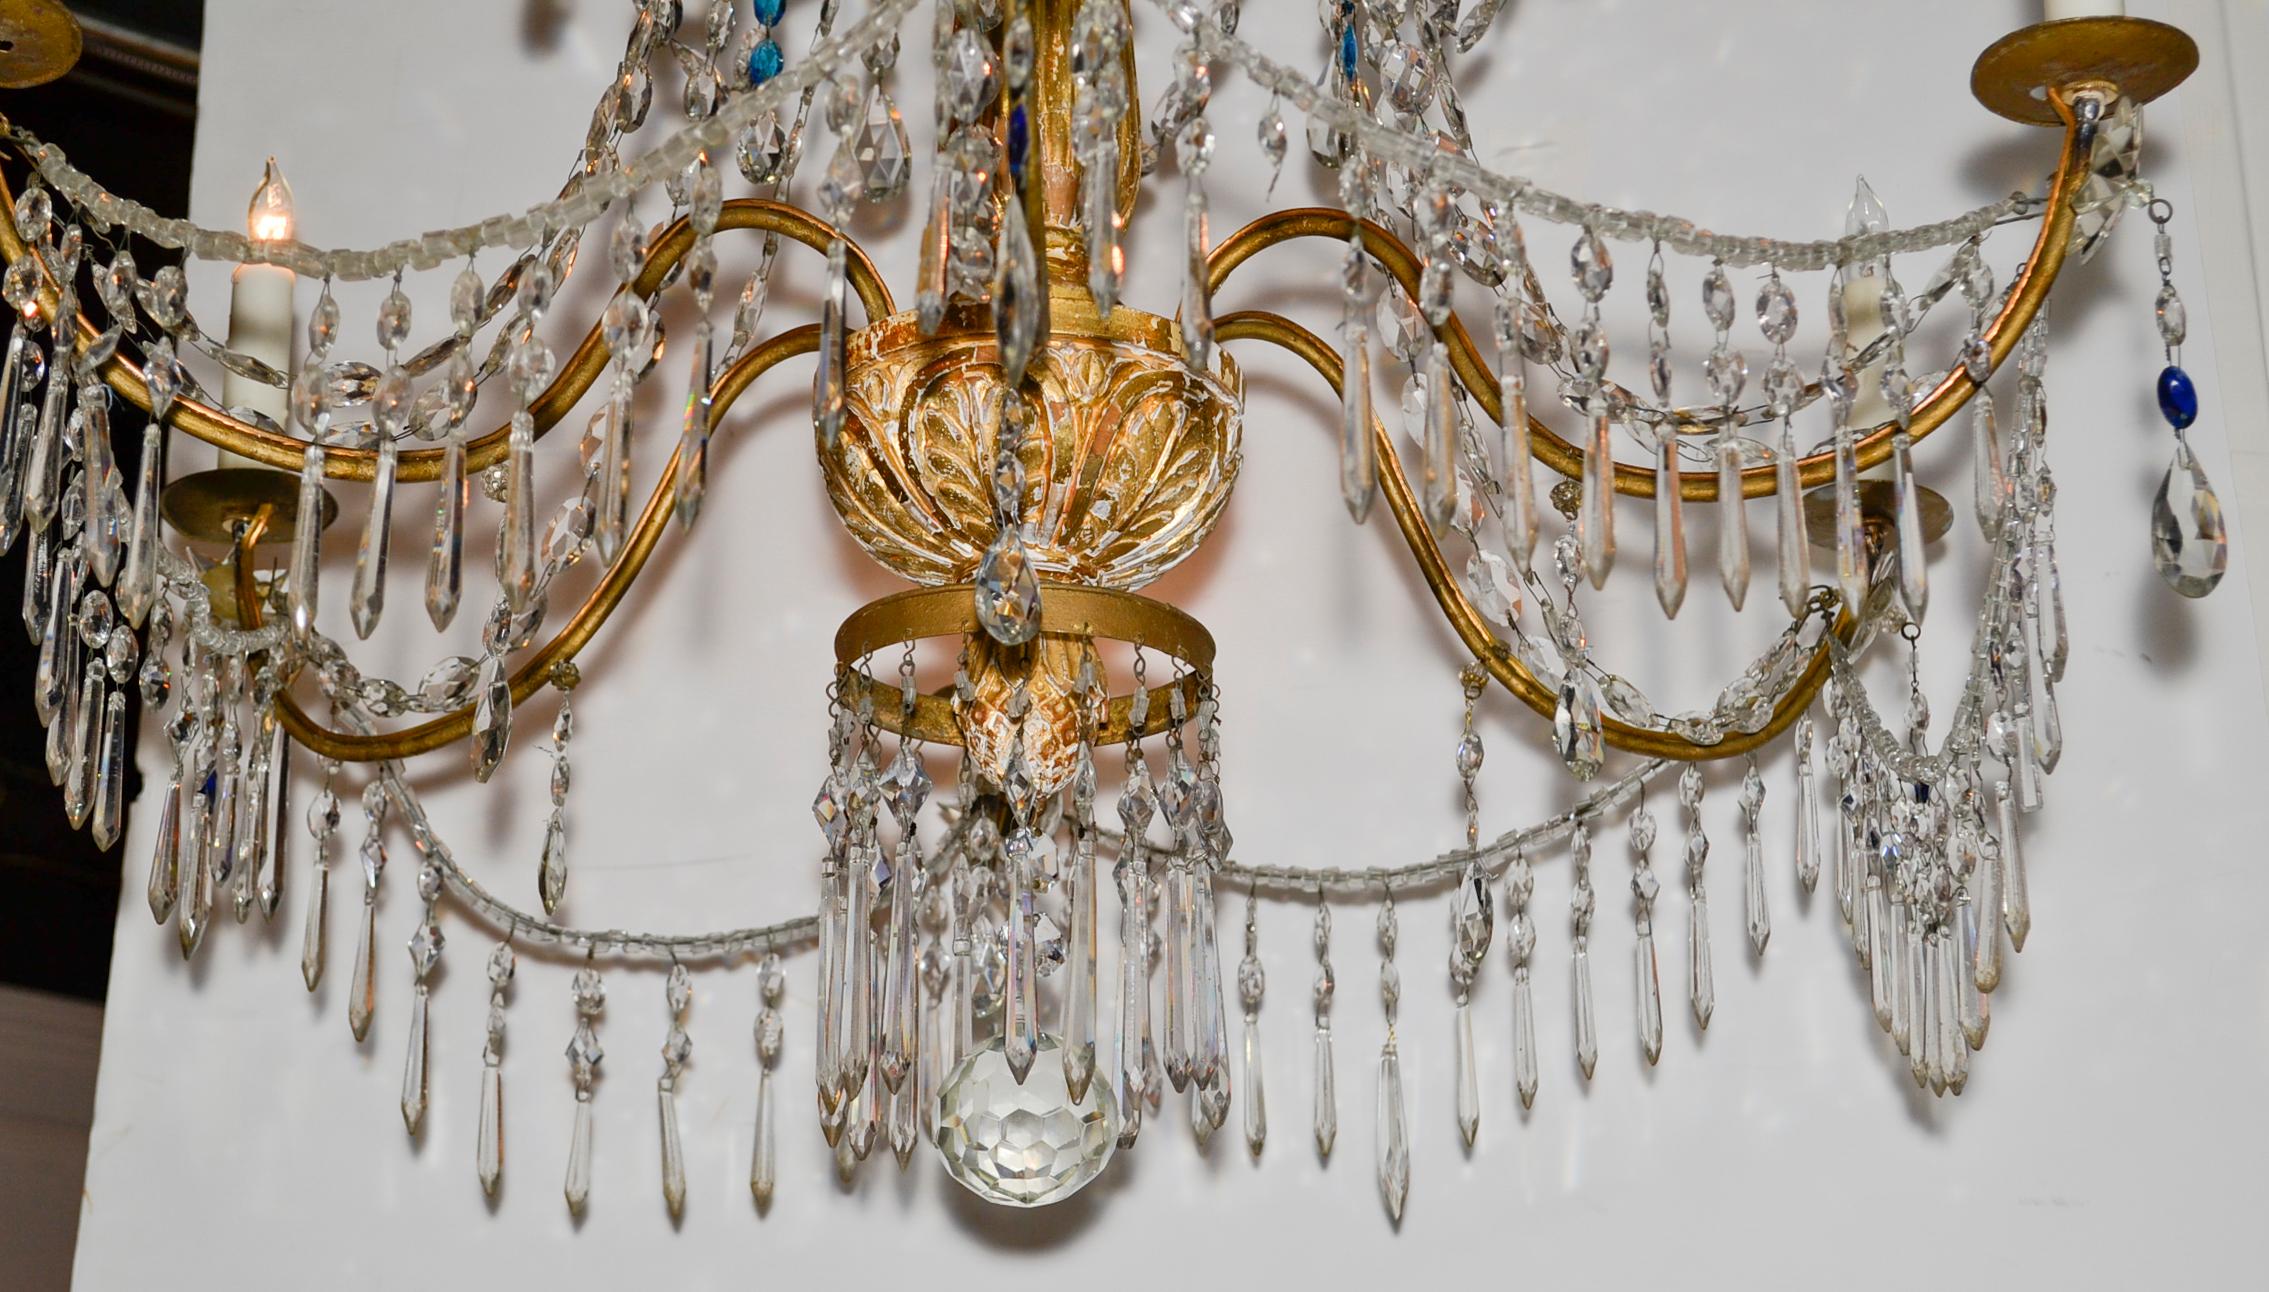 Excellent pair of 18th century Italian giltwood and beaded crystal chandeliers from Genoa.